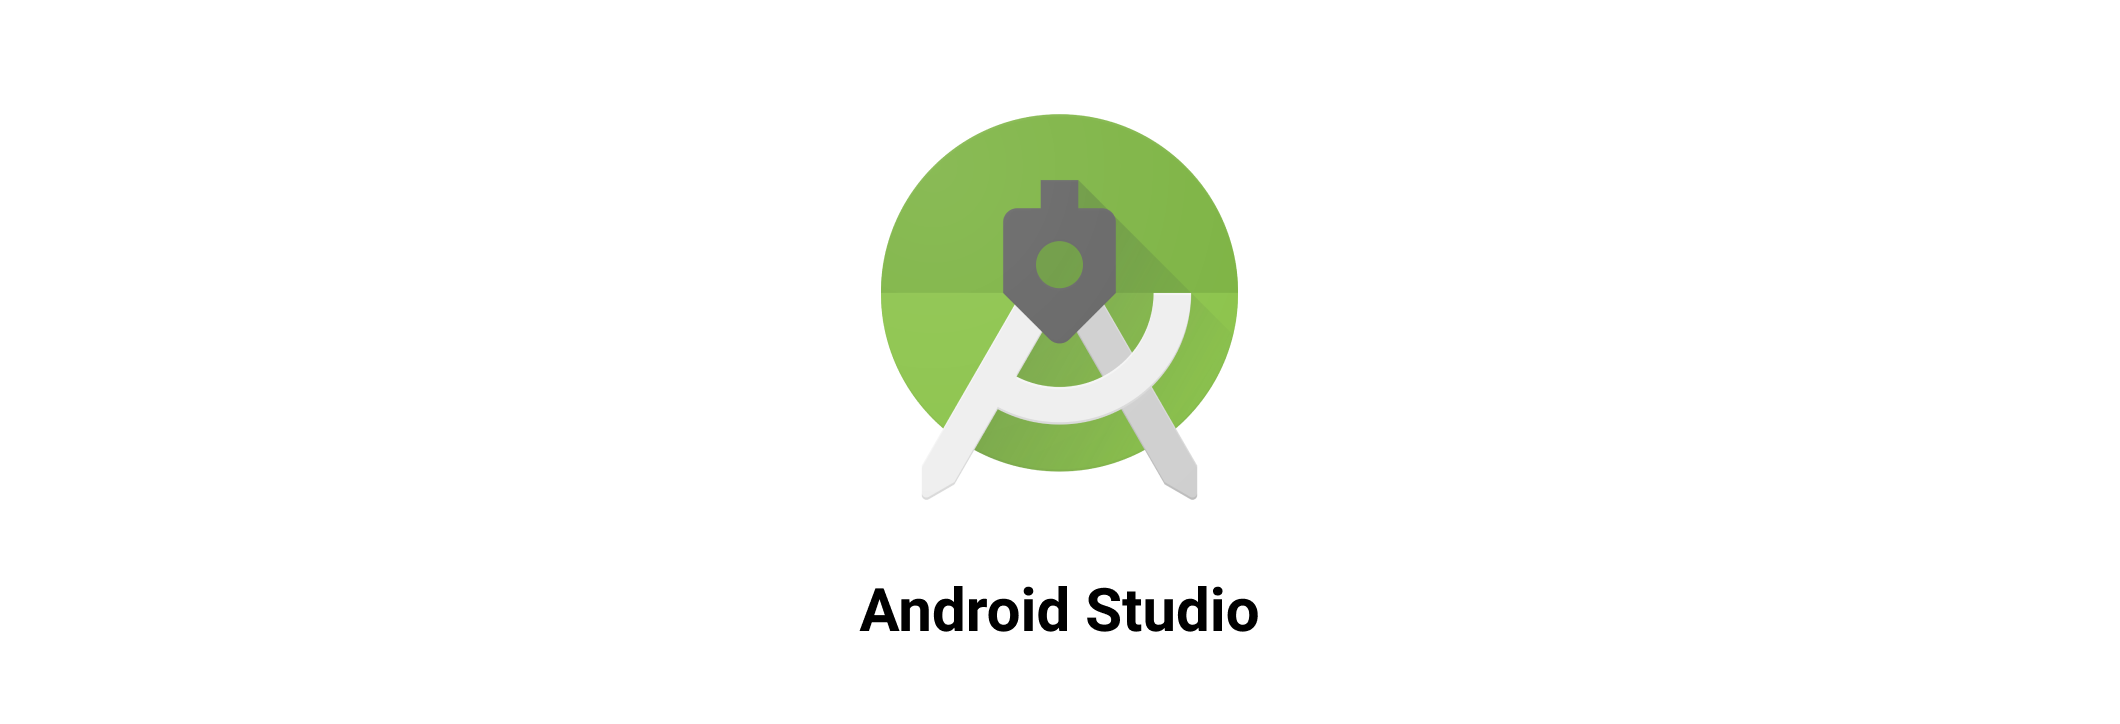 Best Android Development Tools ANDROID STUDIO